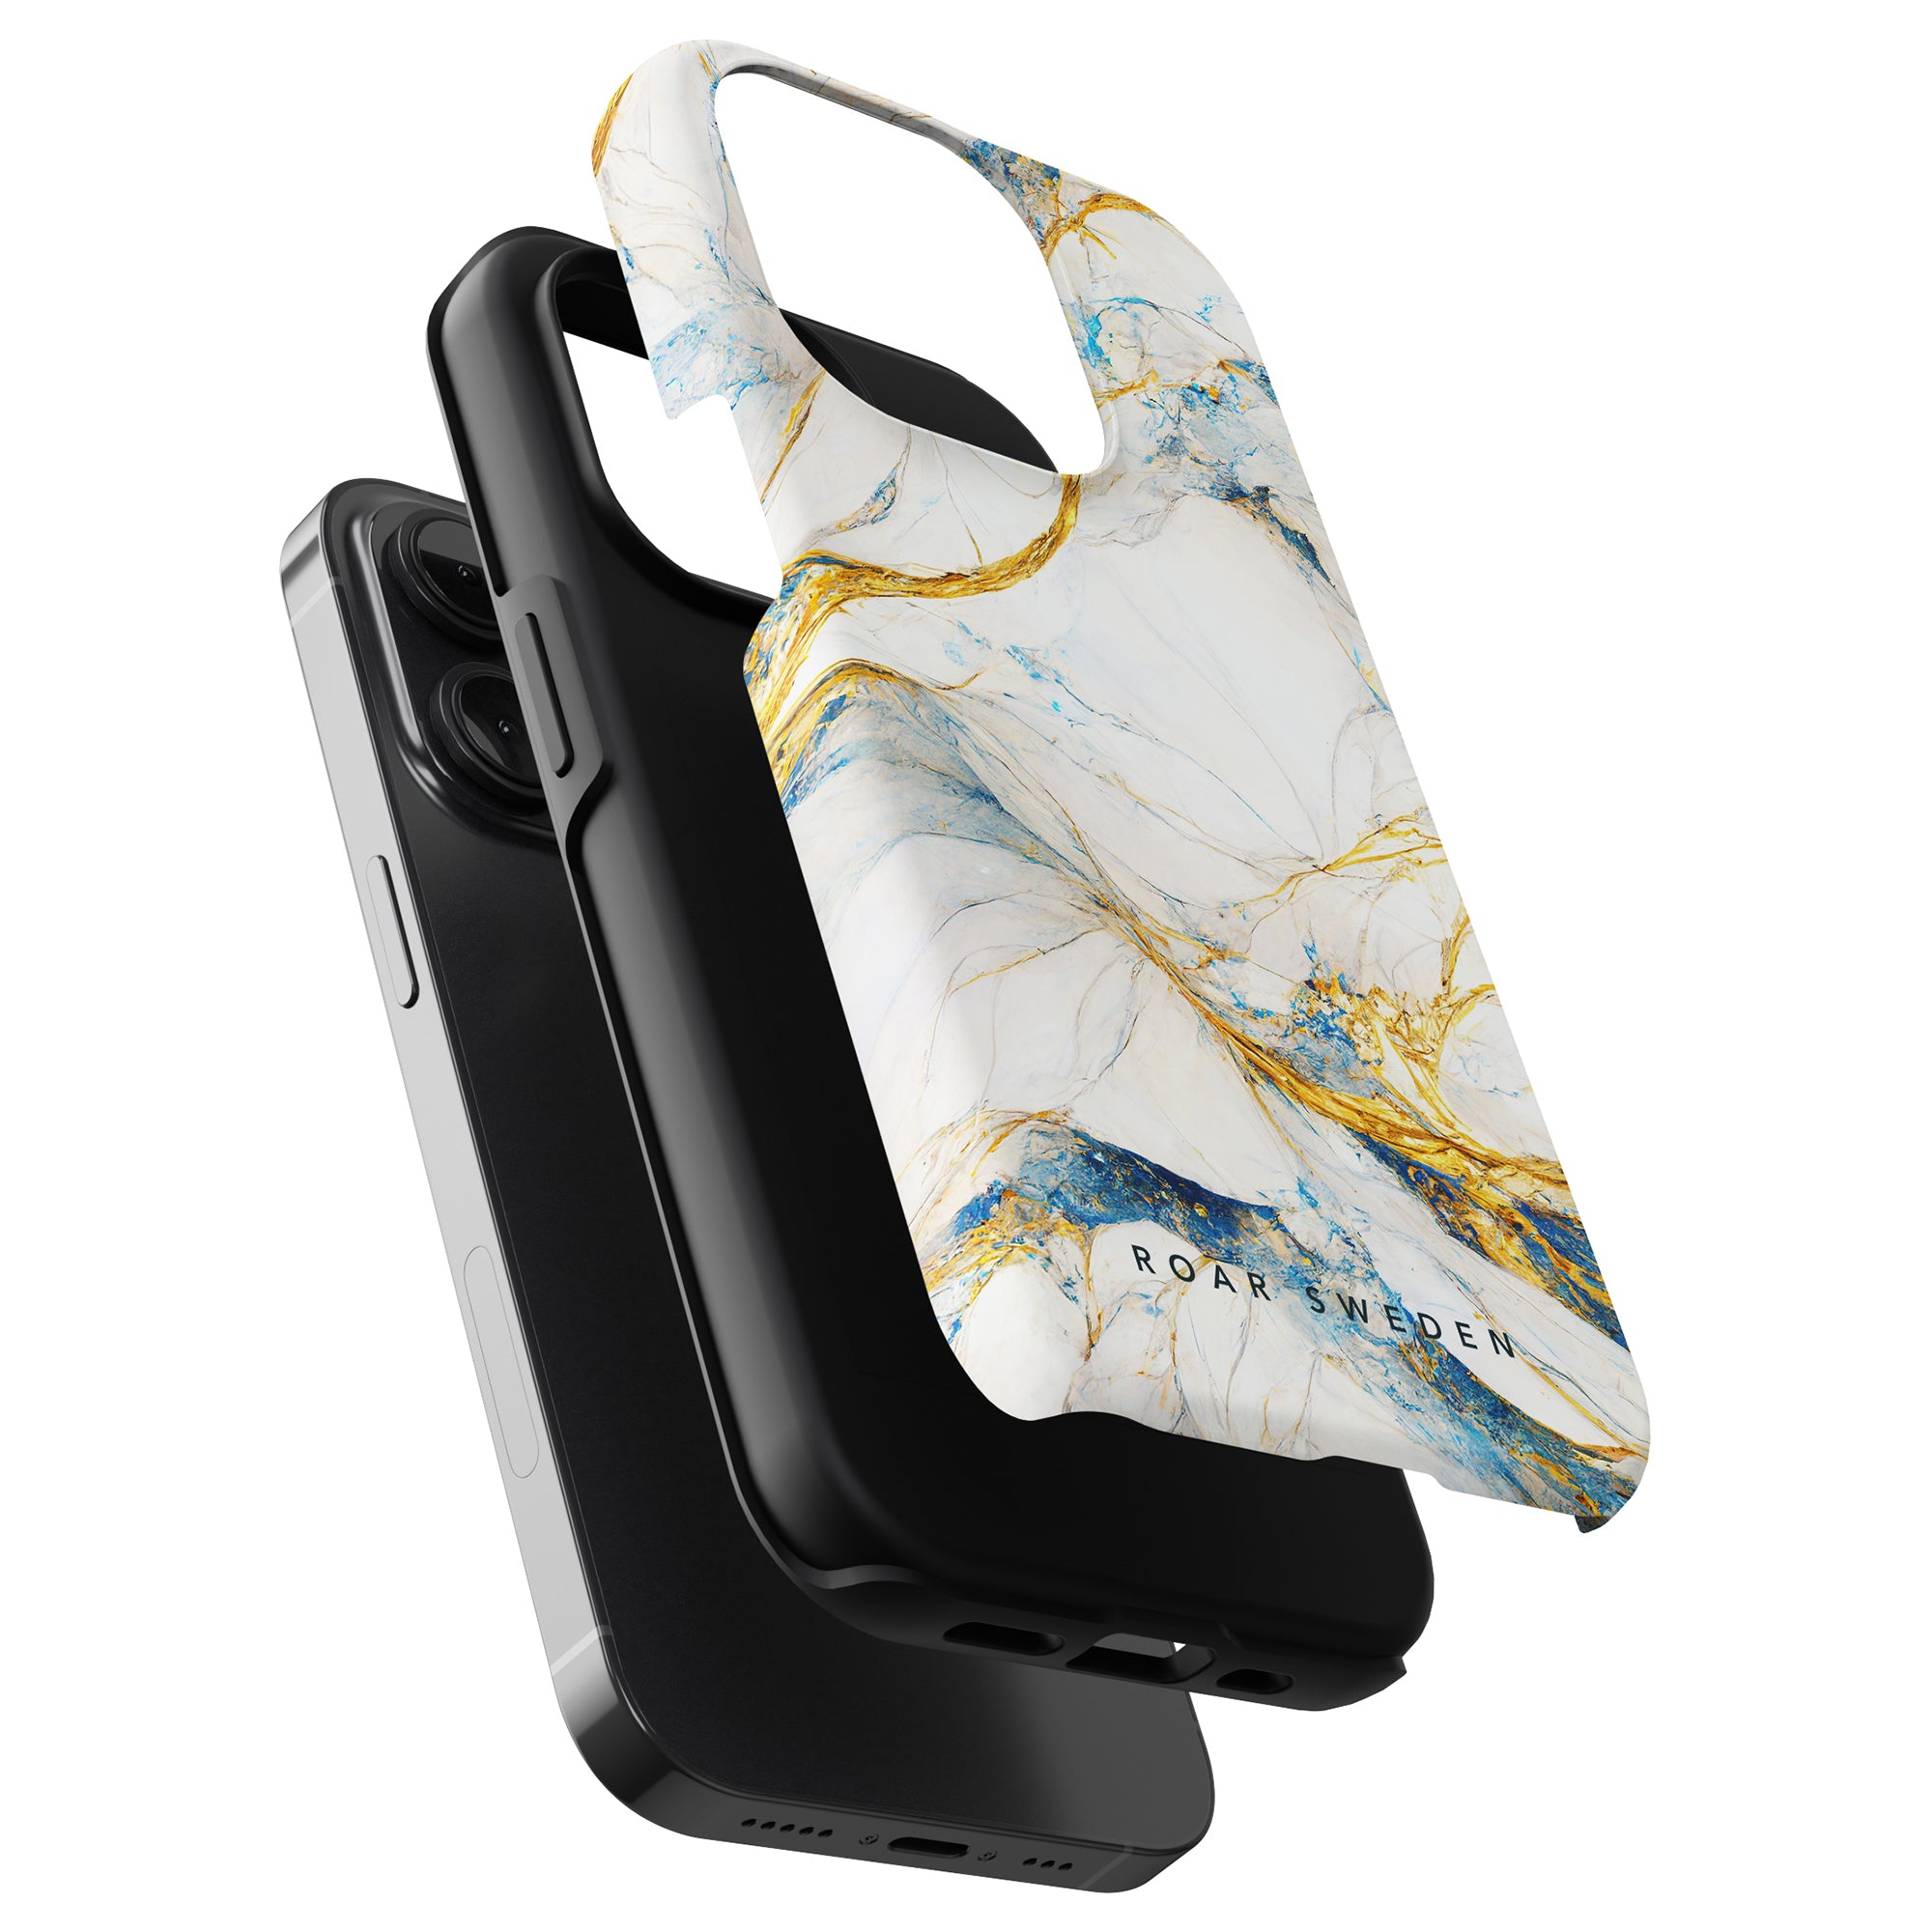 Two Queen Marble - Tough Cases stacked vertically from the hybrid collection; the front case is patterned with a marble design and the rear is a plain, tough black case.